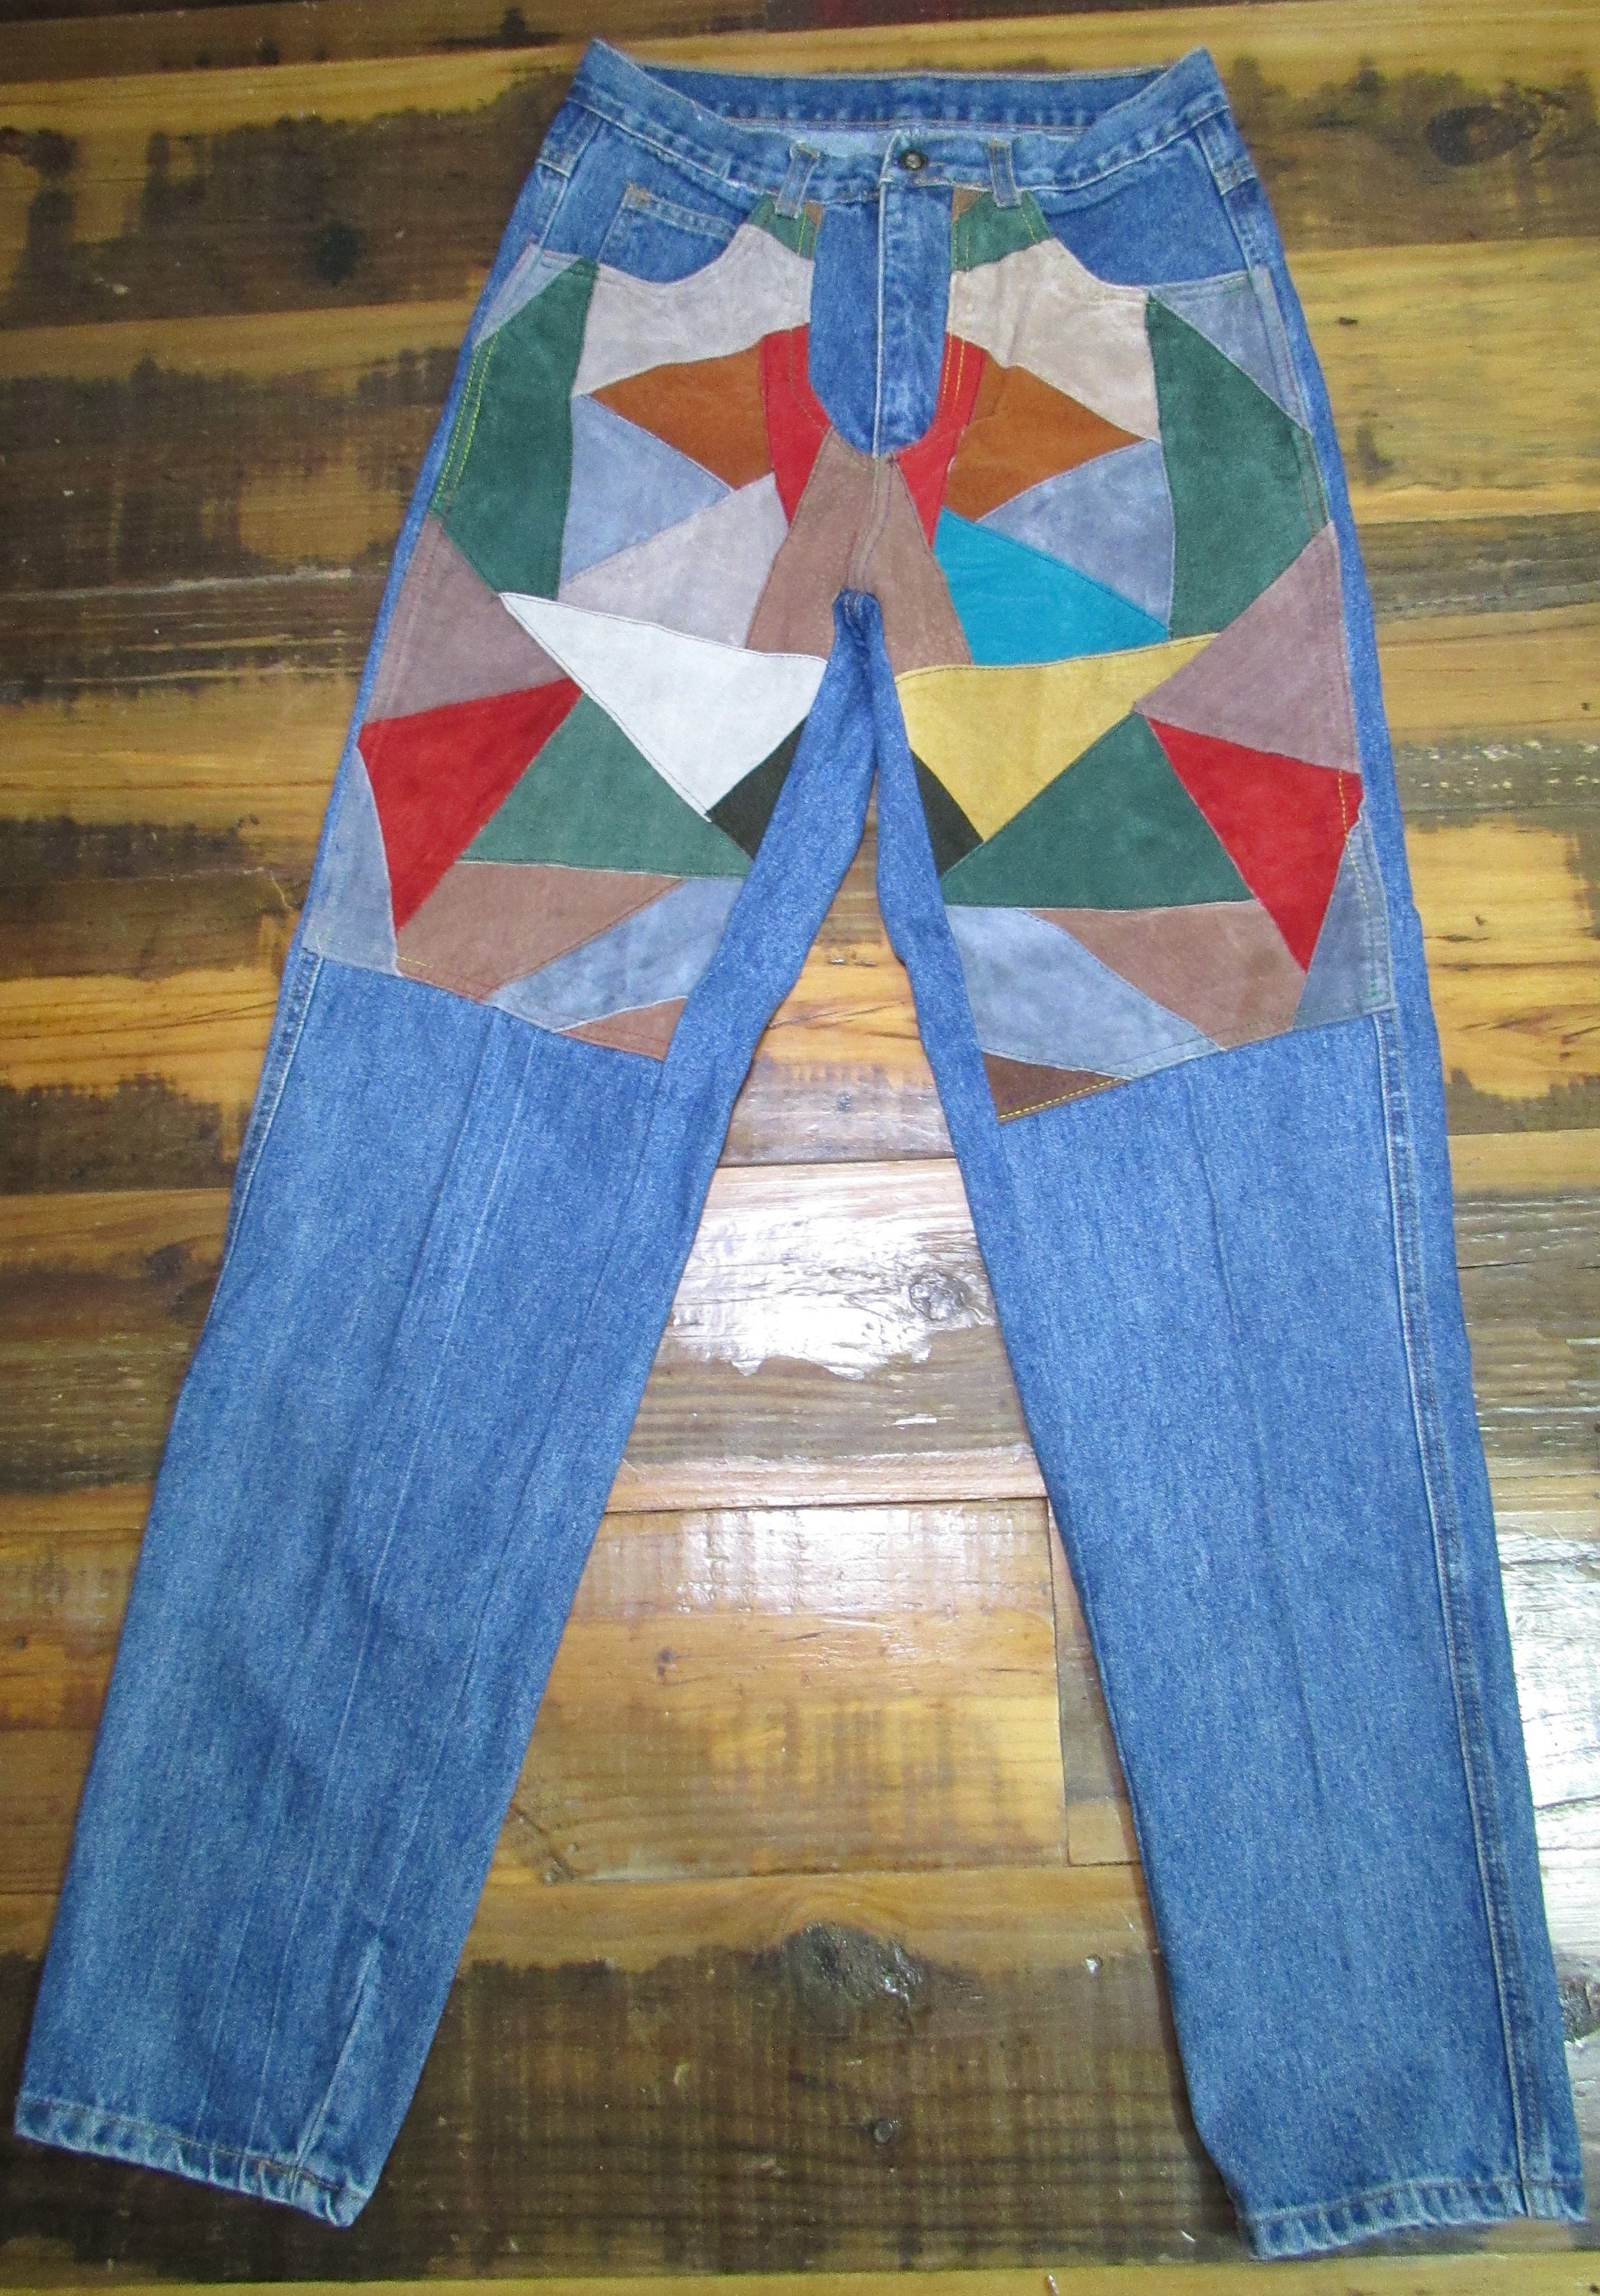 Upcycled Levi's Patched Jeans Custom Reworked Patched Denim